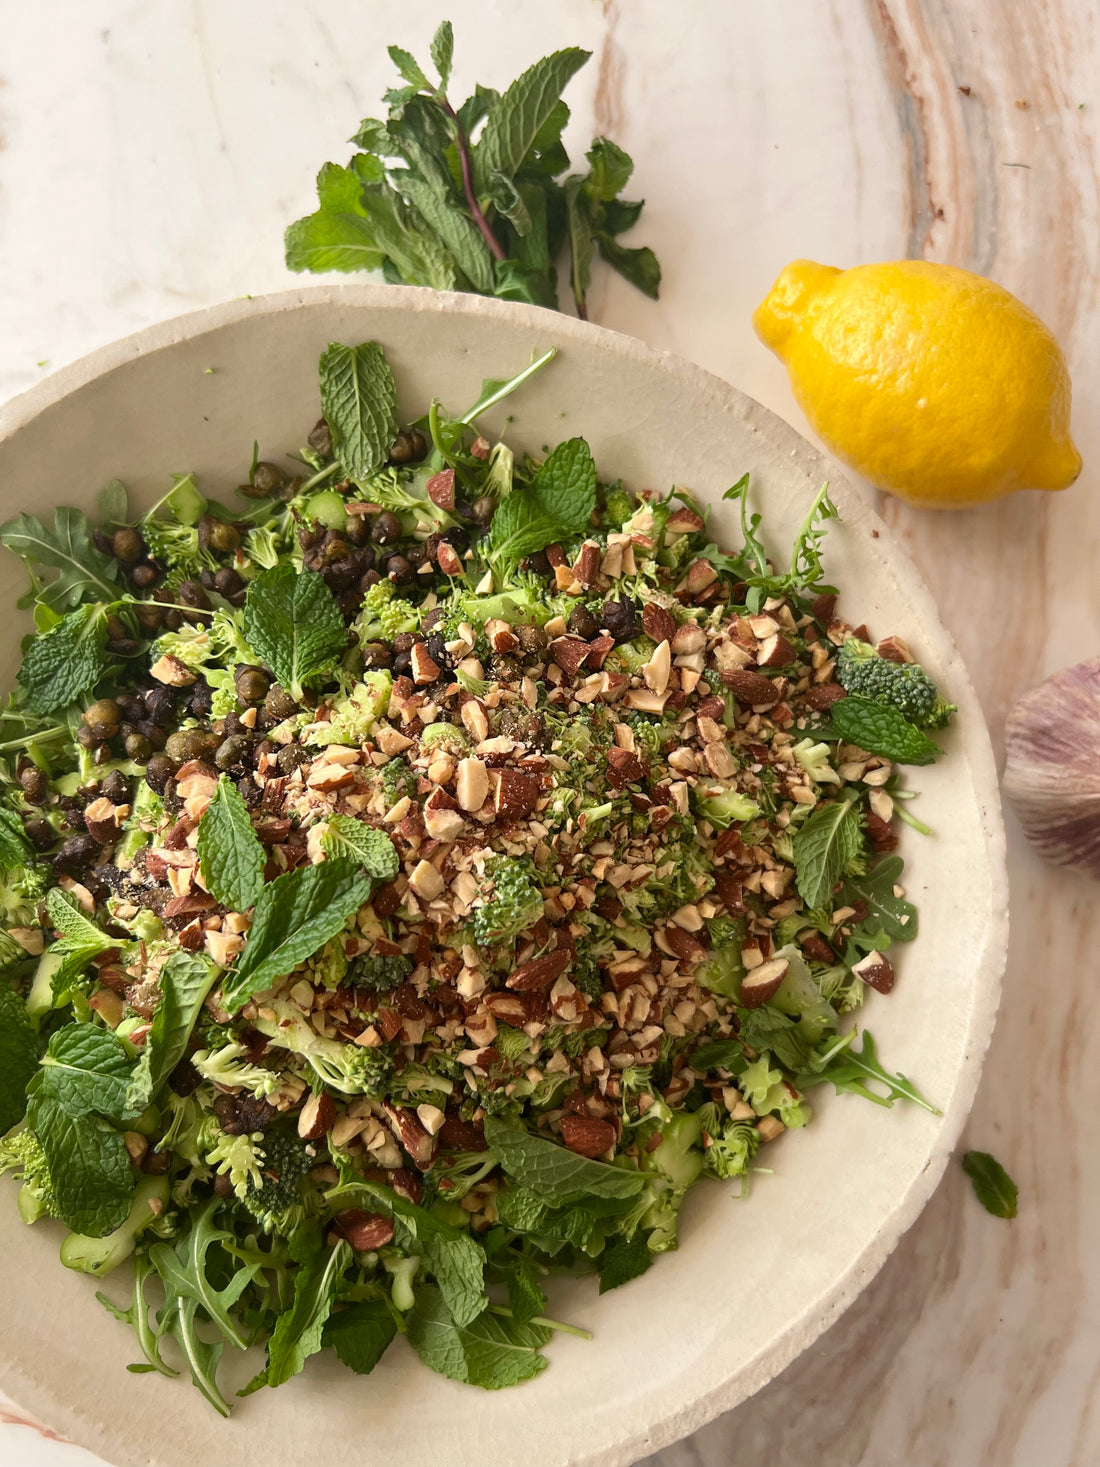 Green Goddess Broccoli Salad with Almonds, Capers and Mint